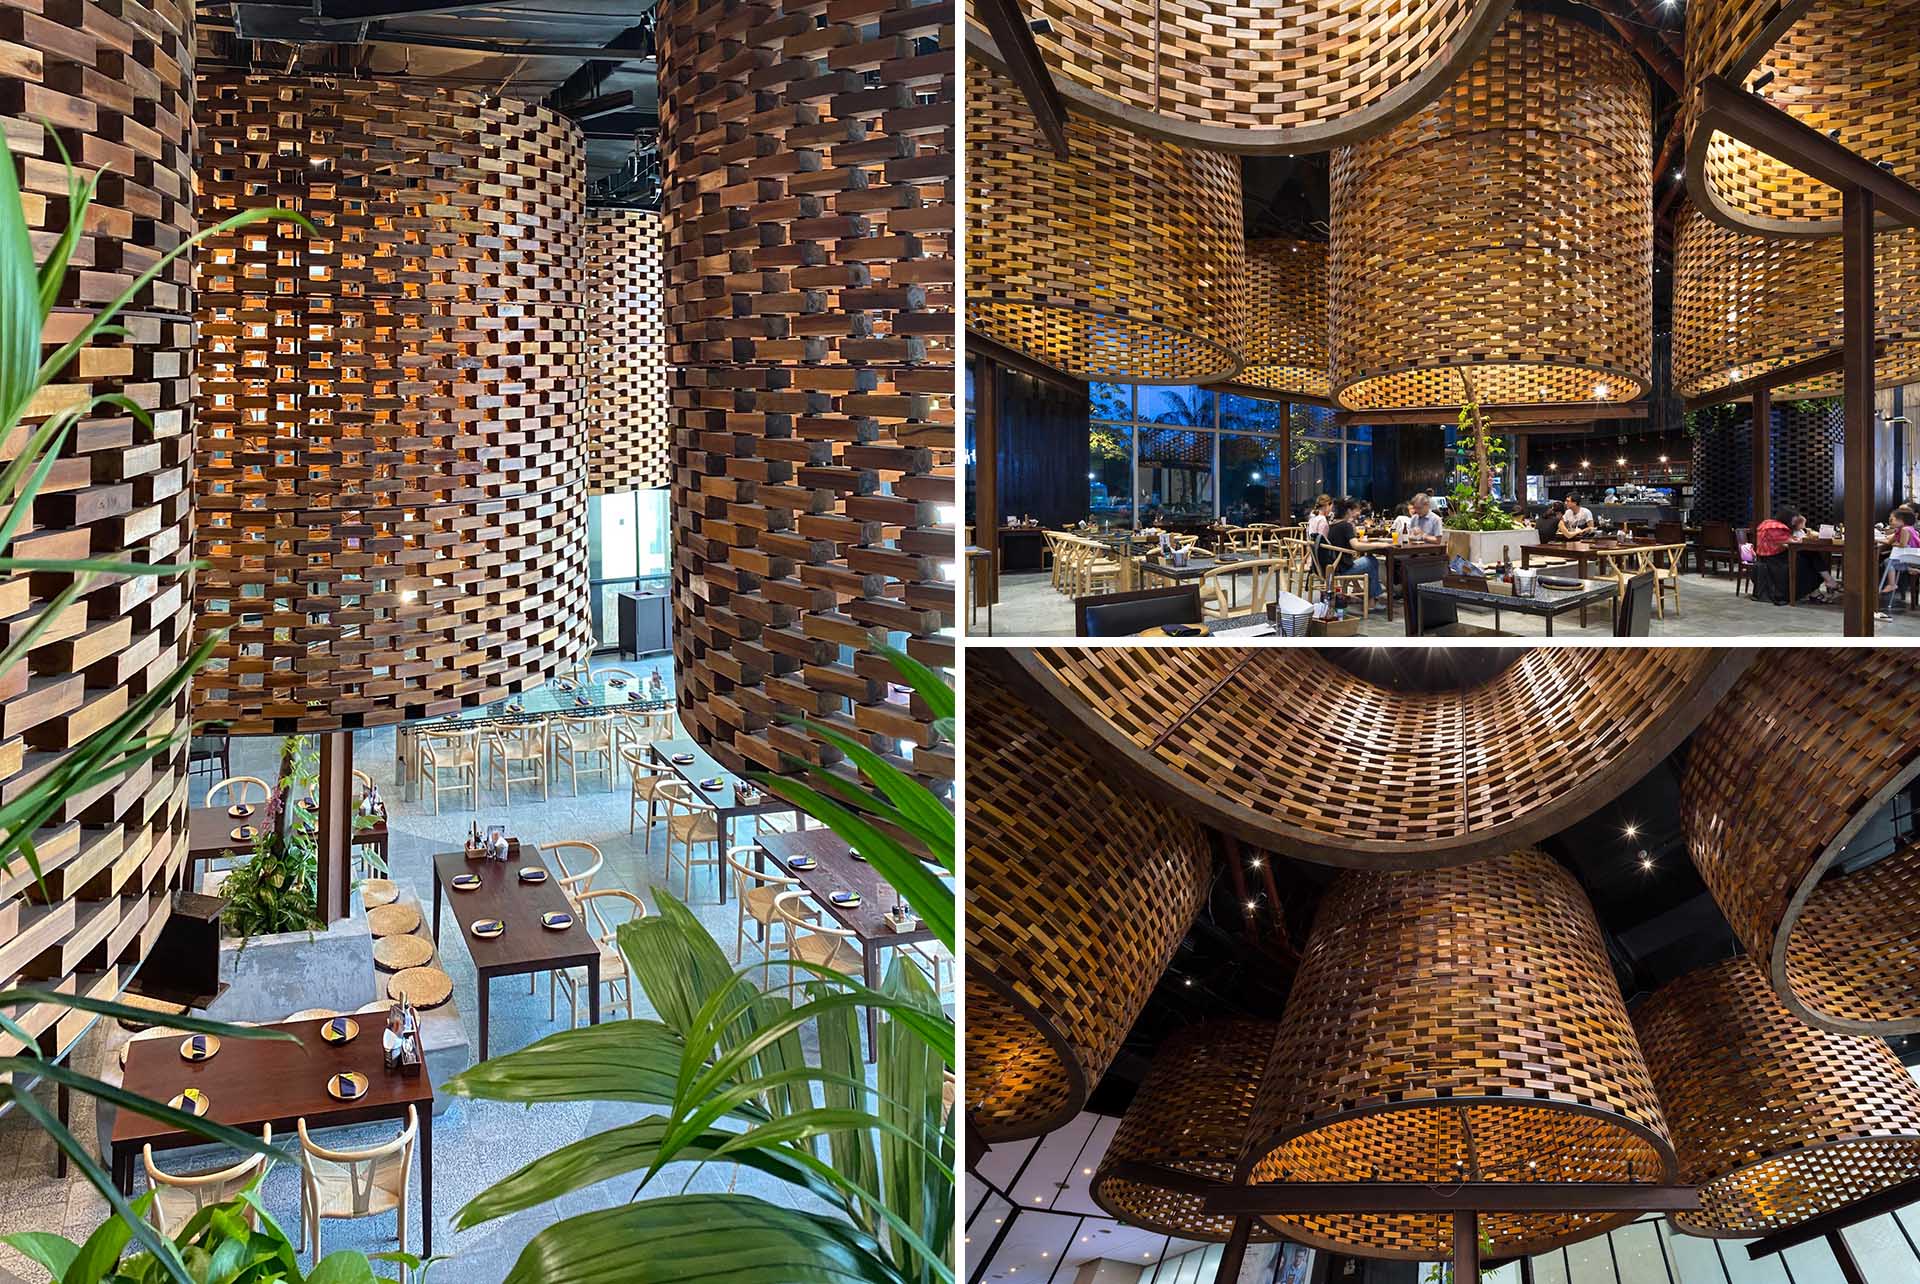 A modern restaurant with large sculptural cylinders made from wood bricks.